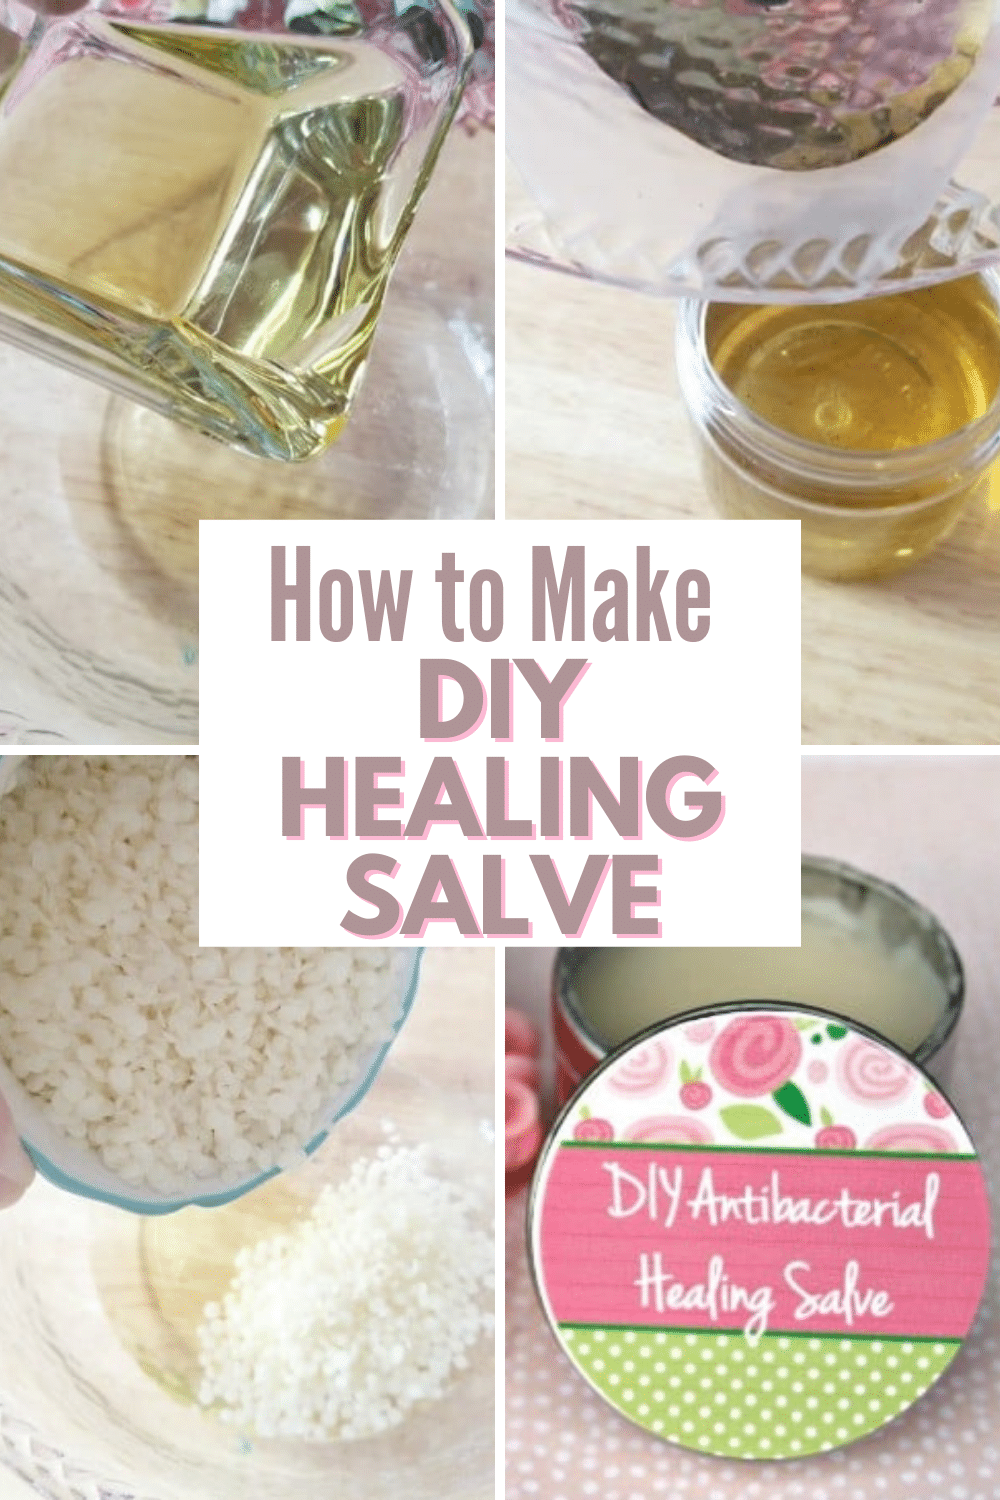 This DIY healing salve is easy to make and is perfect for so many things! Treats minor cuts and burns, insect bites, dry skin, and even warts! #natural #DIYbeauty via @wondermomwannab